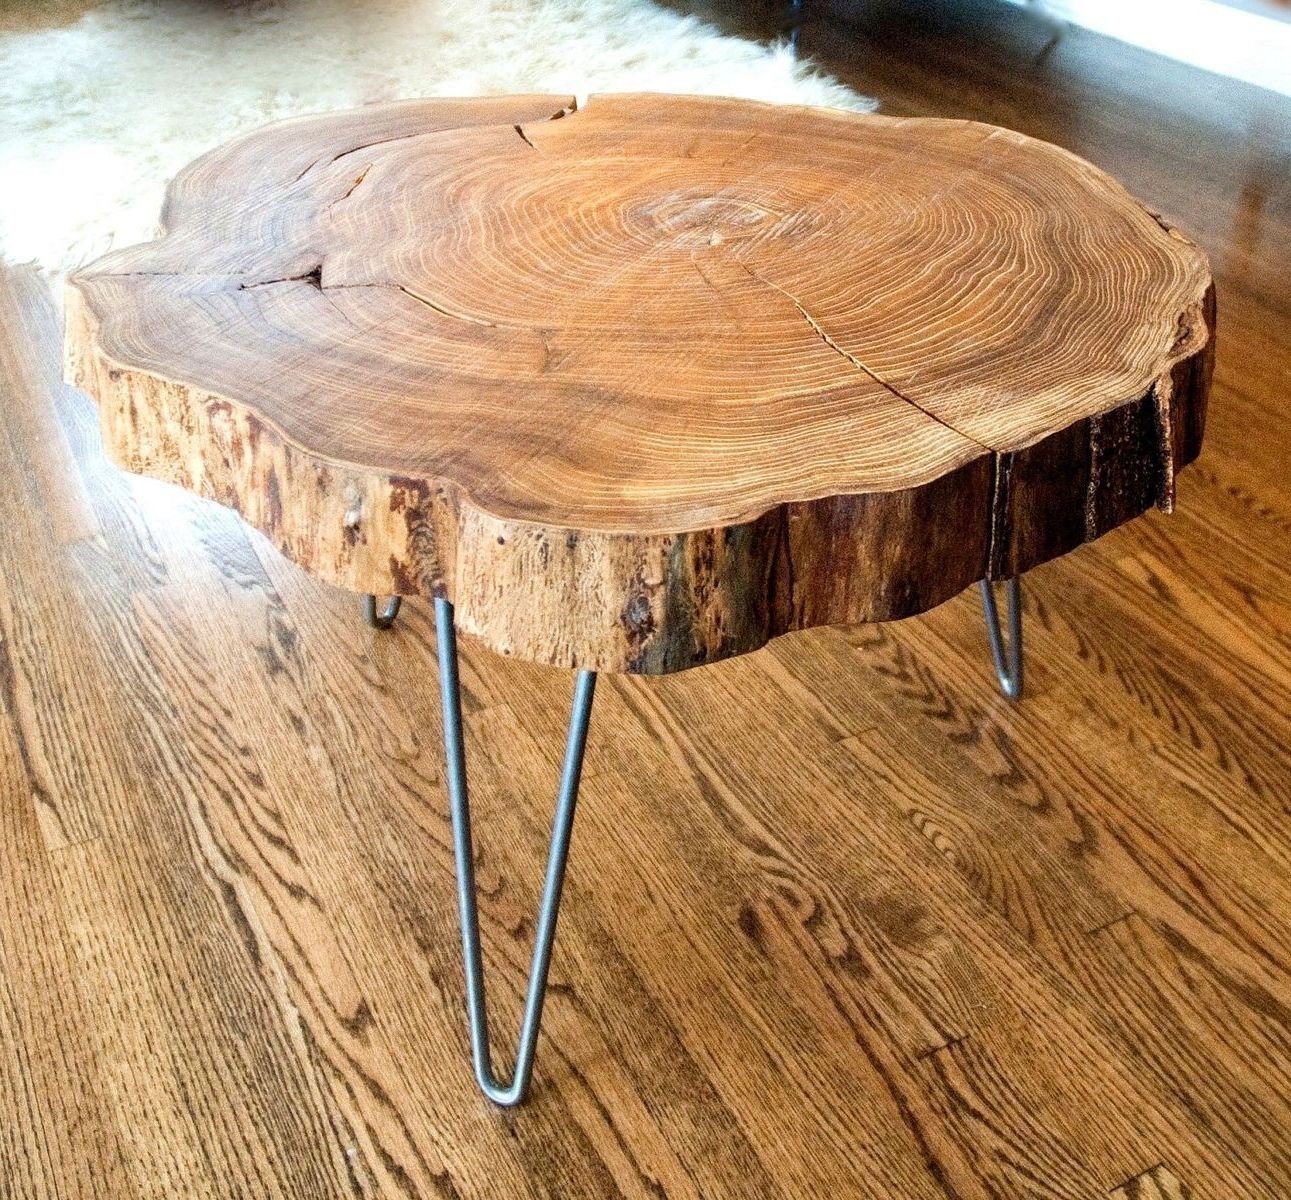 Fashionable Fresh Tree Trunk Slice Coffee Table • The Ignite Show In Sliced Trunk Coffee Tables (View 1 of 20)